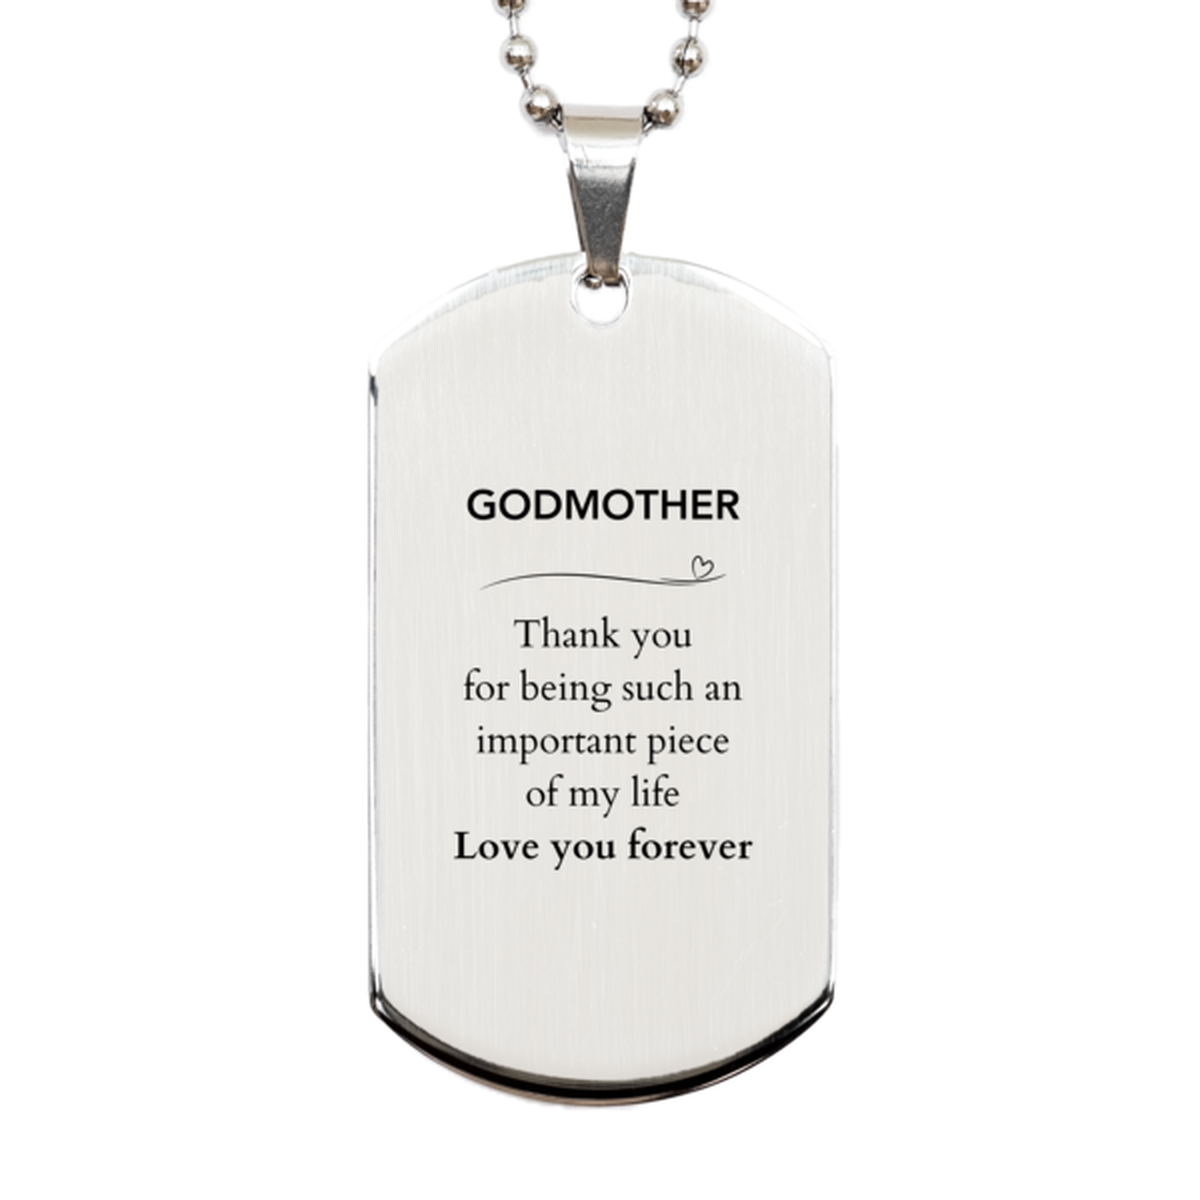 Appropriate Godmother Silver Dog Tag Epic Birthday Gifts for Godmother Thank you for being such an important piece of my life Godmother Christmas Mothers Fathers Day